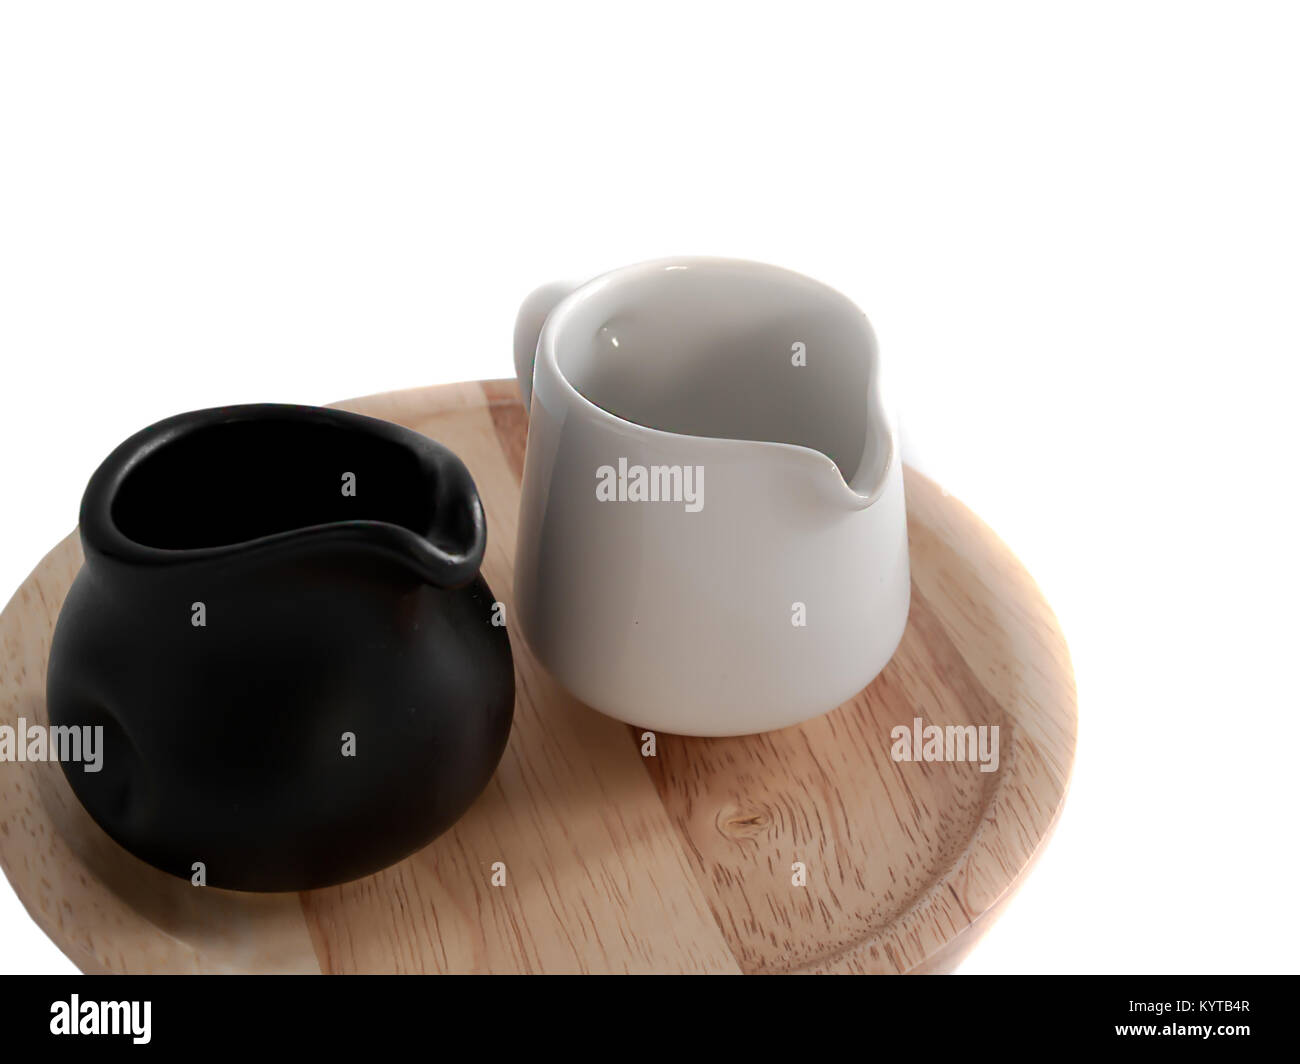 Cup milk, milk containers with white and black. Stock Photo